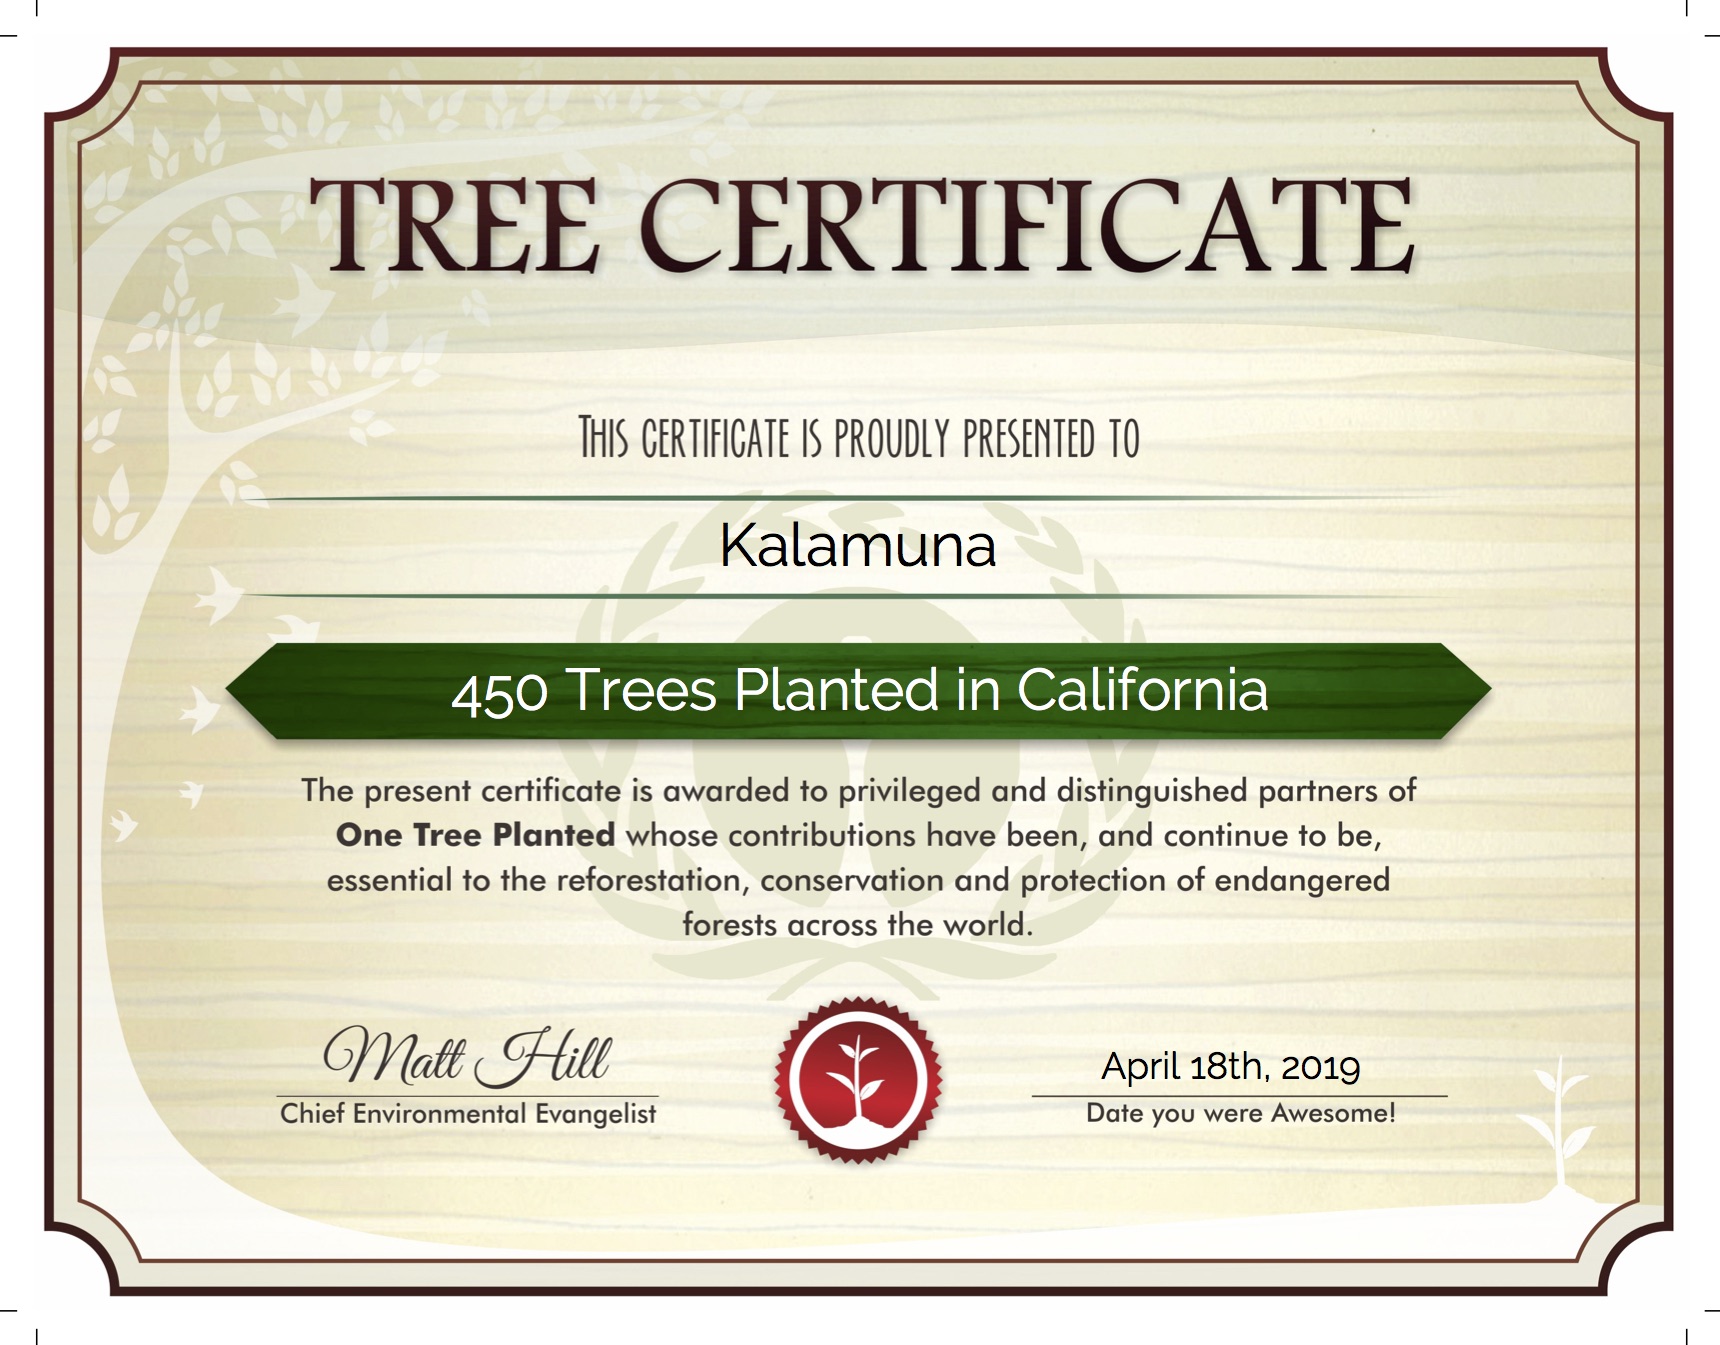 A digital certificate from OneTree Planted verifying our 450 trees